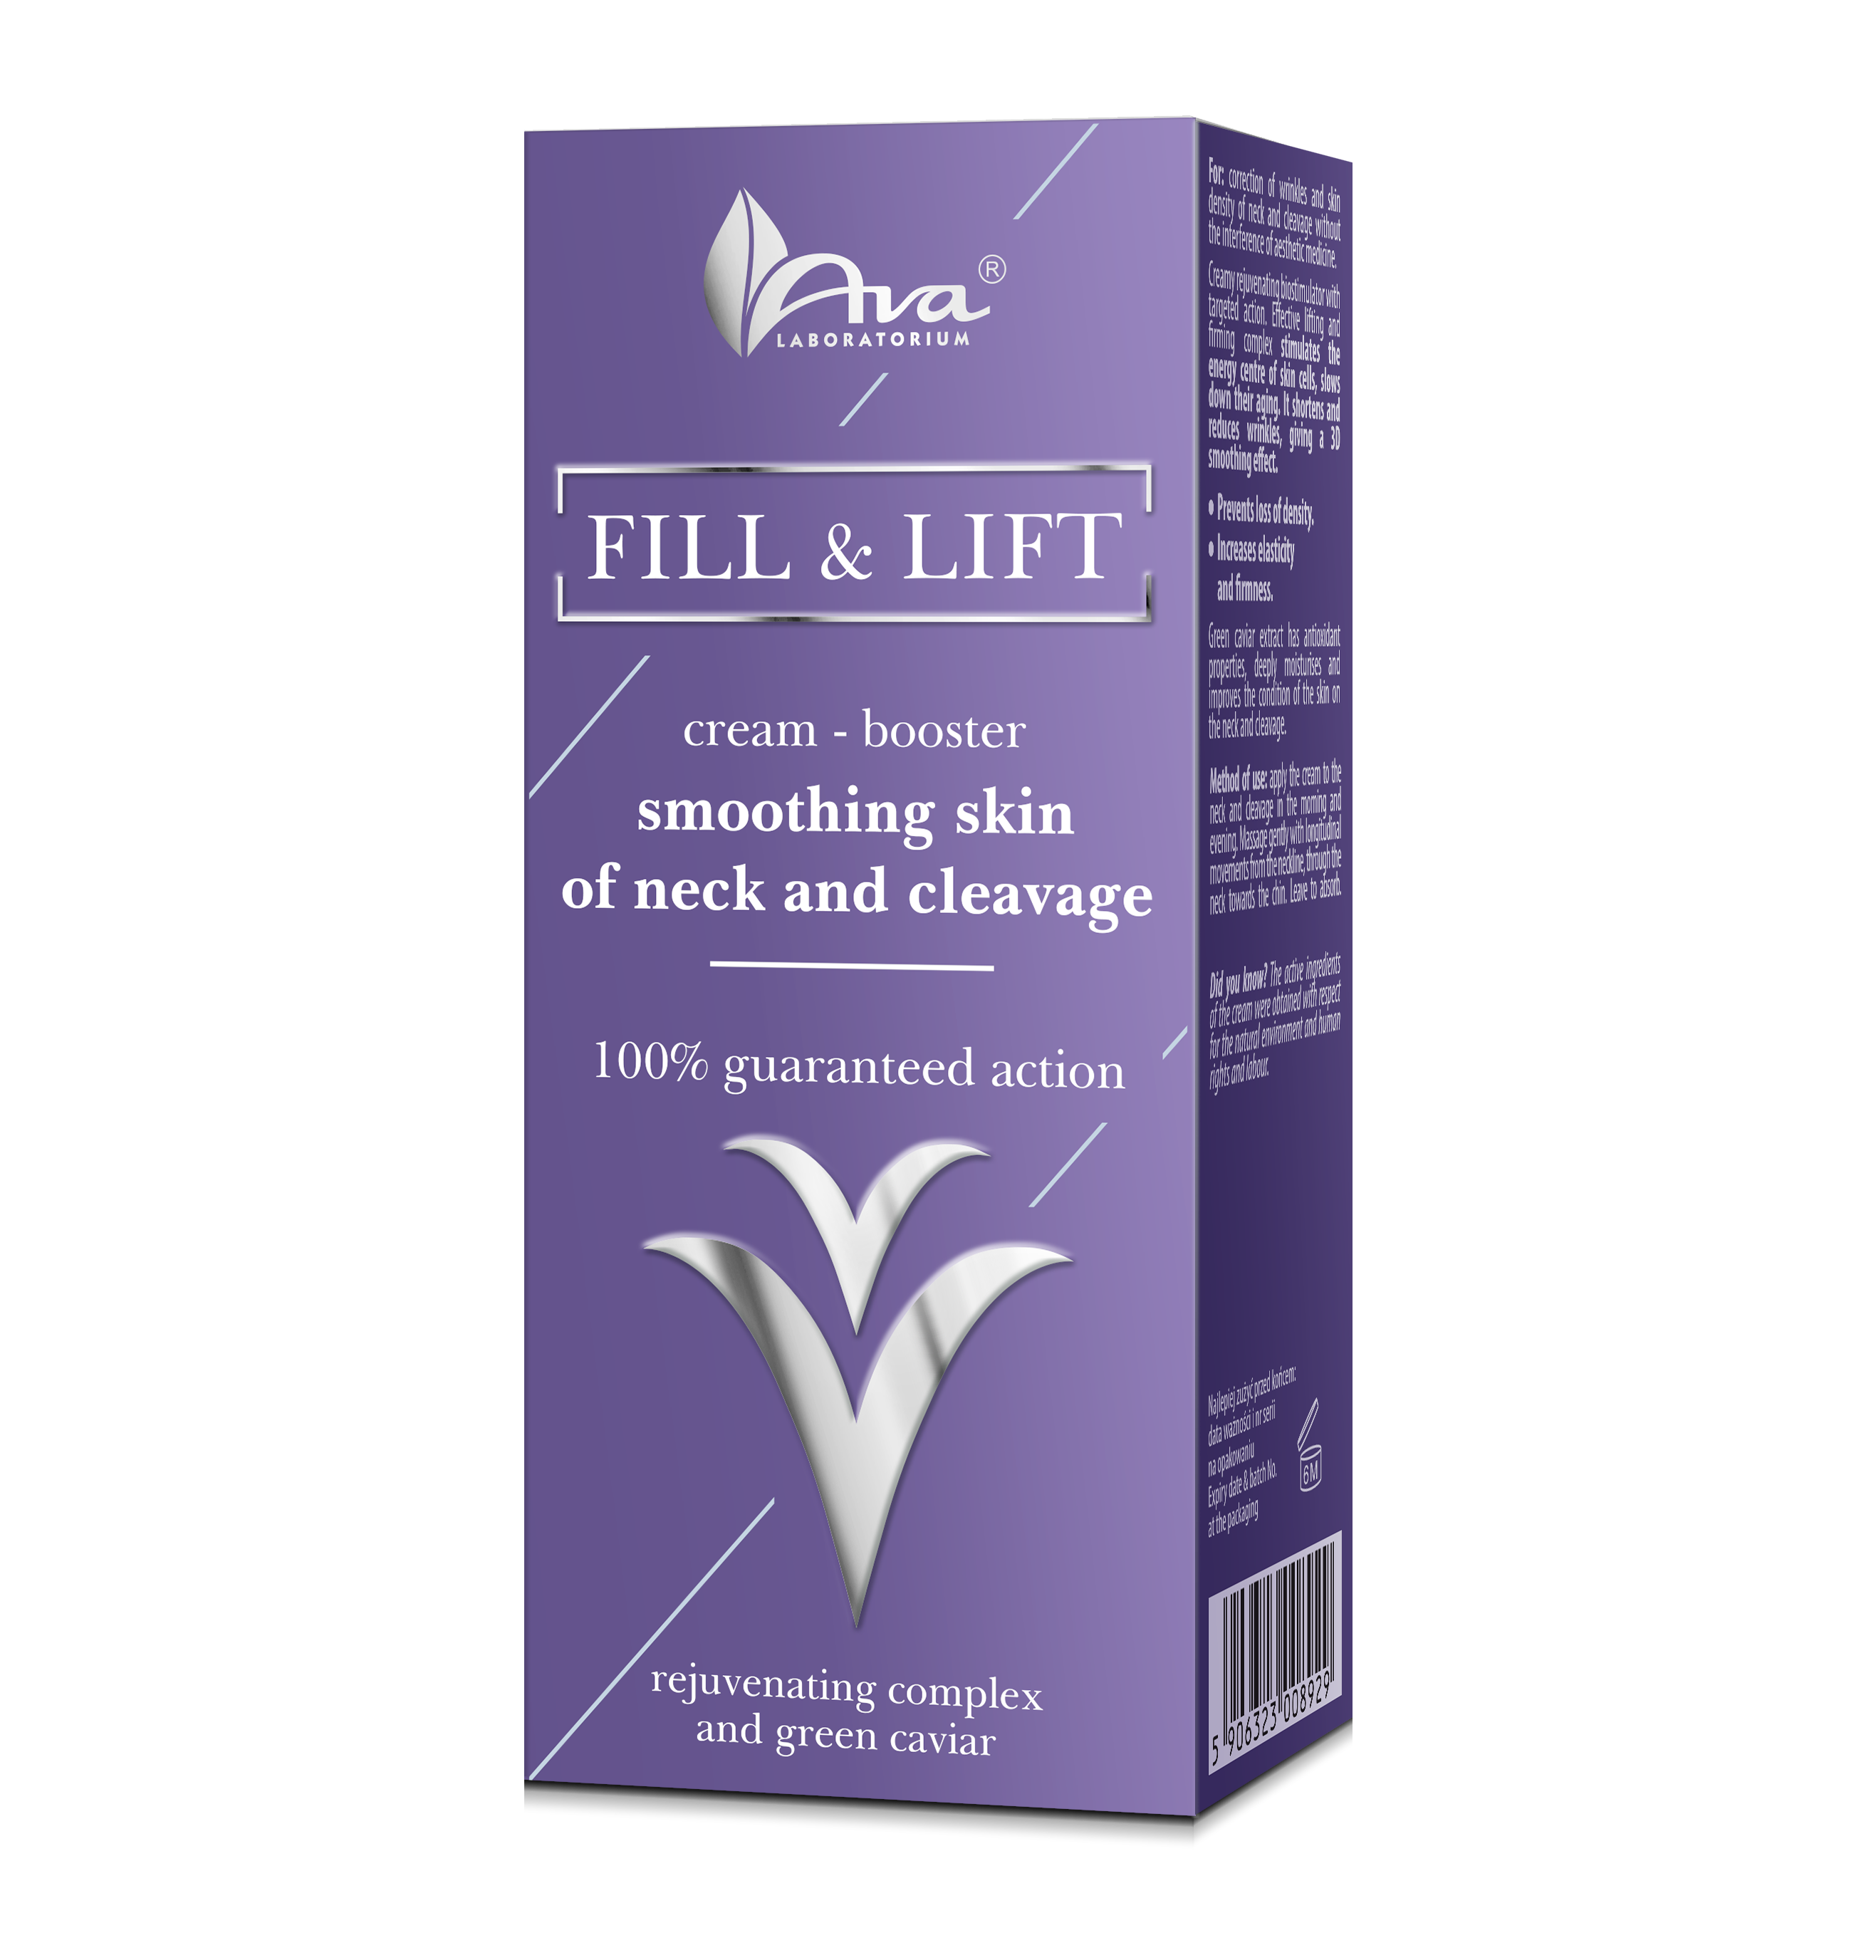 8929_FILL&LIFT_cream_booster_smoothing_skin_of_neck_and_cleavage_BOX_ENG